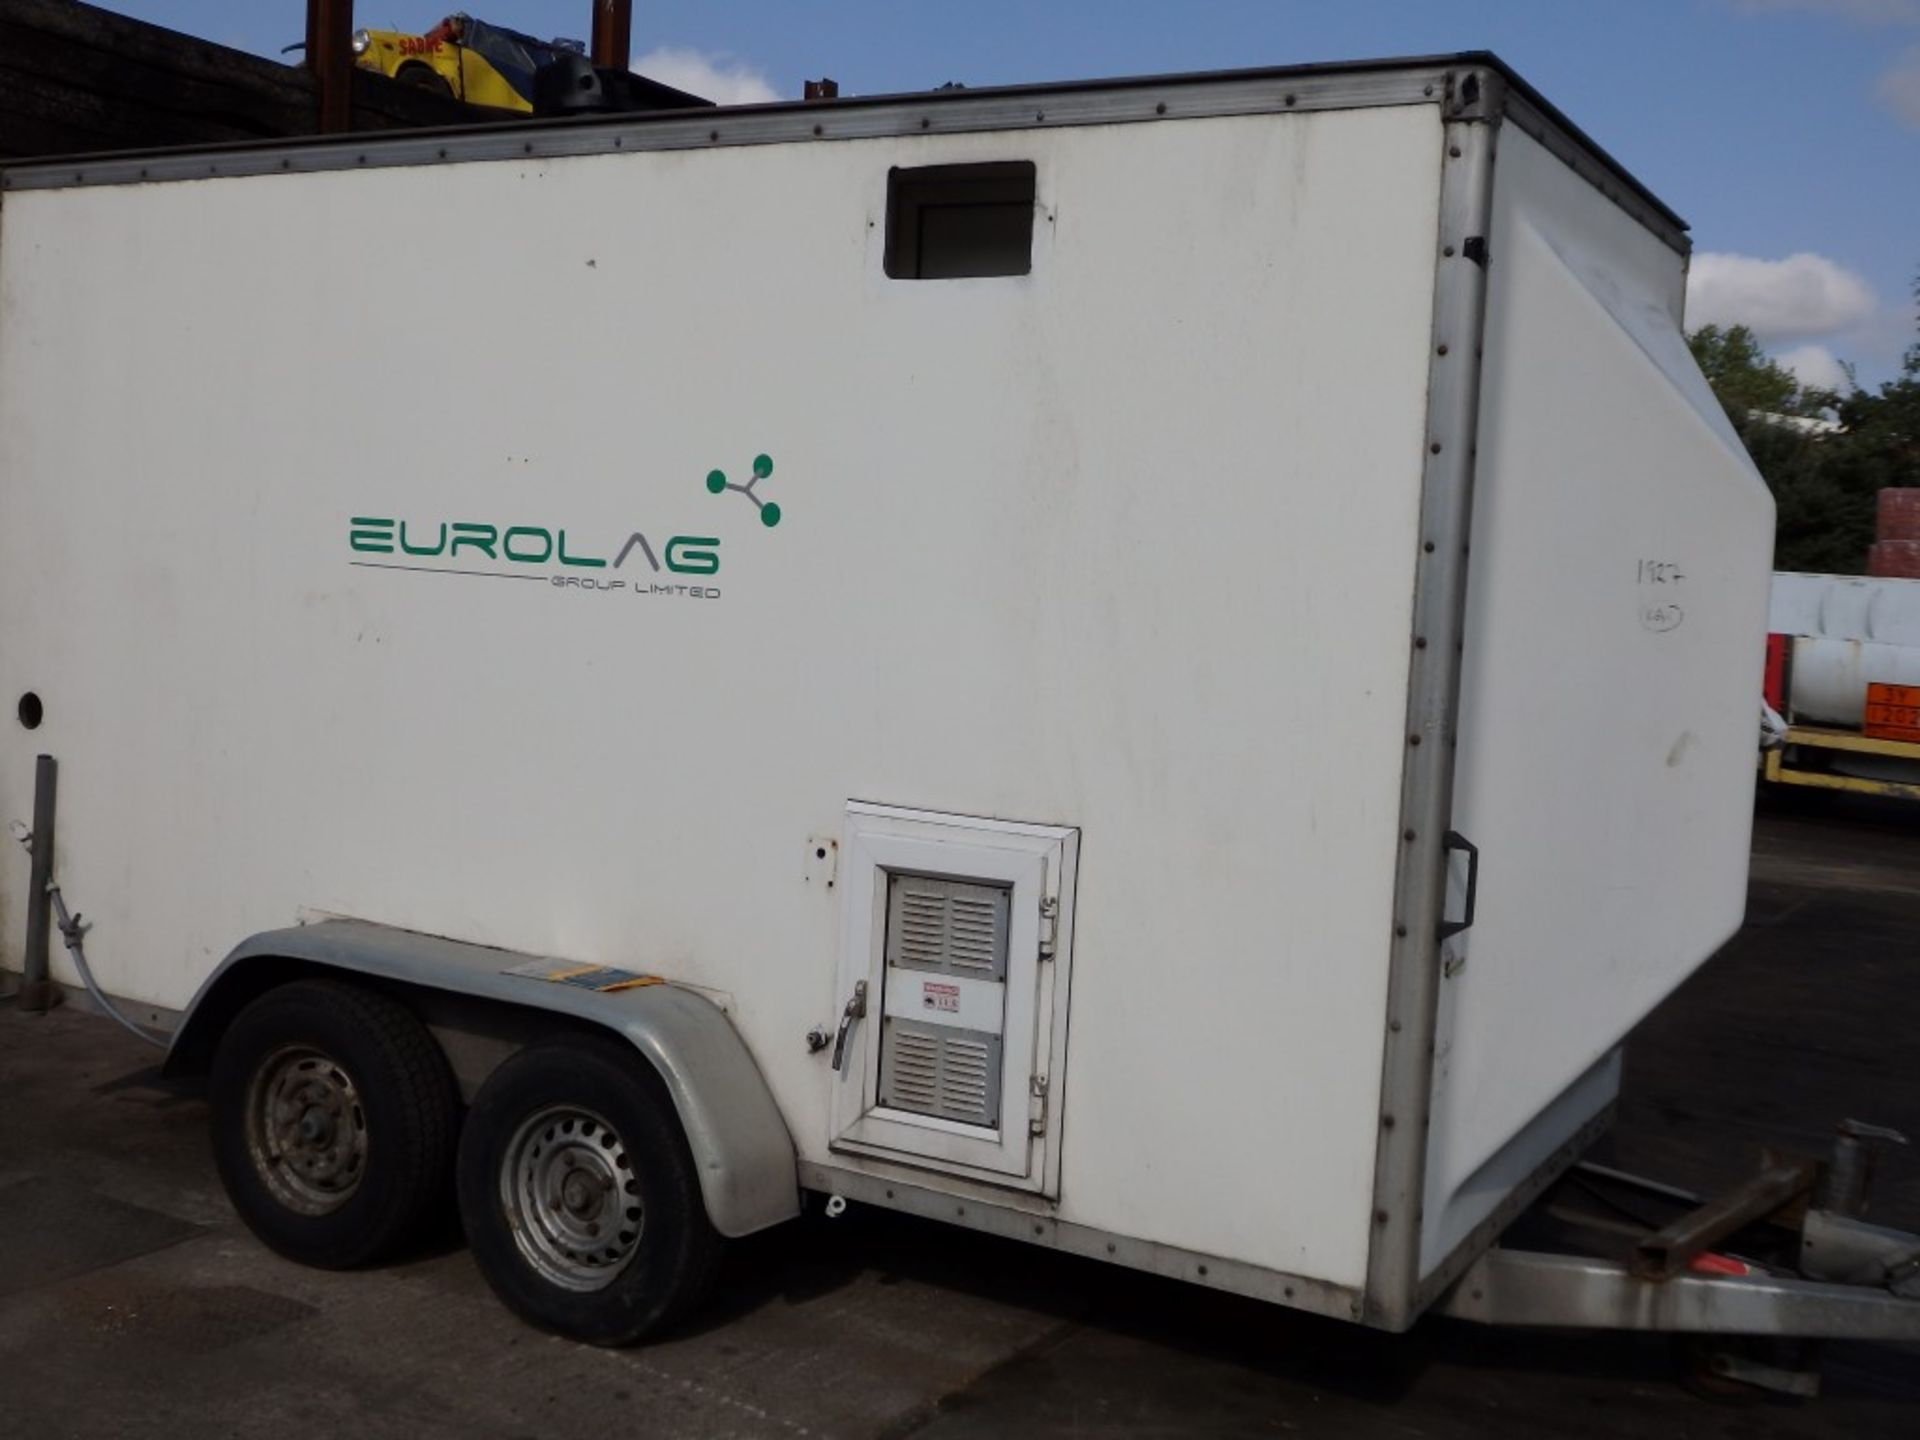 1 x Eurolag Towing Trailer With In and Out Shower Facility - Previously Used As Decontamination Wash - Image 7 of 31